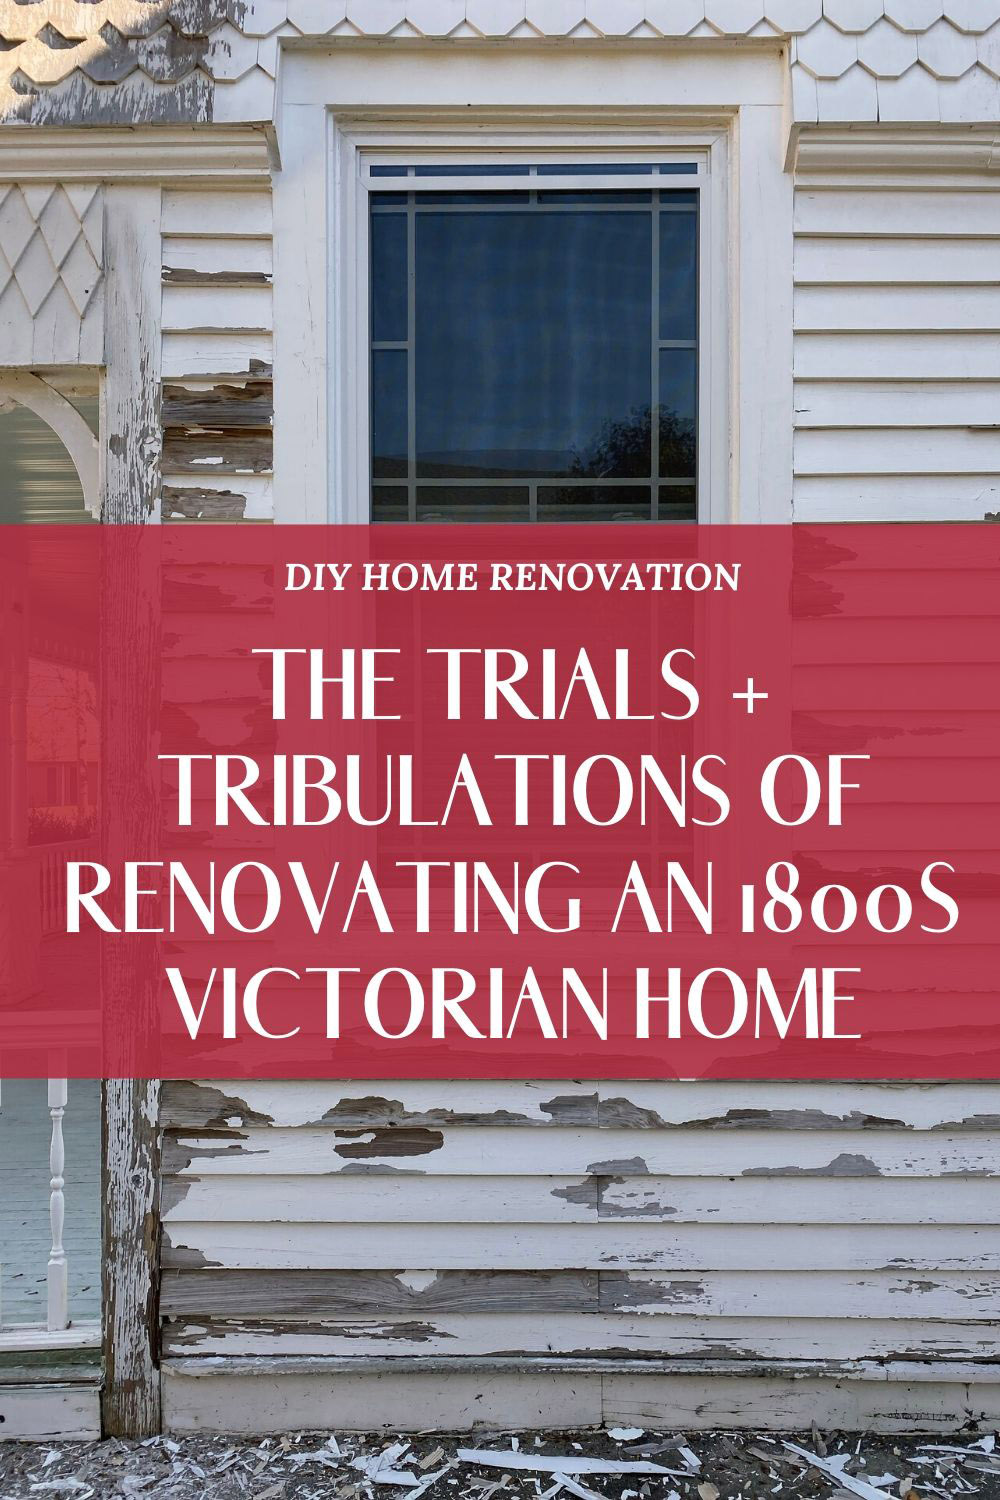 Home Renovating: Rehabbing an 1800s Queen Anne Victorian House